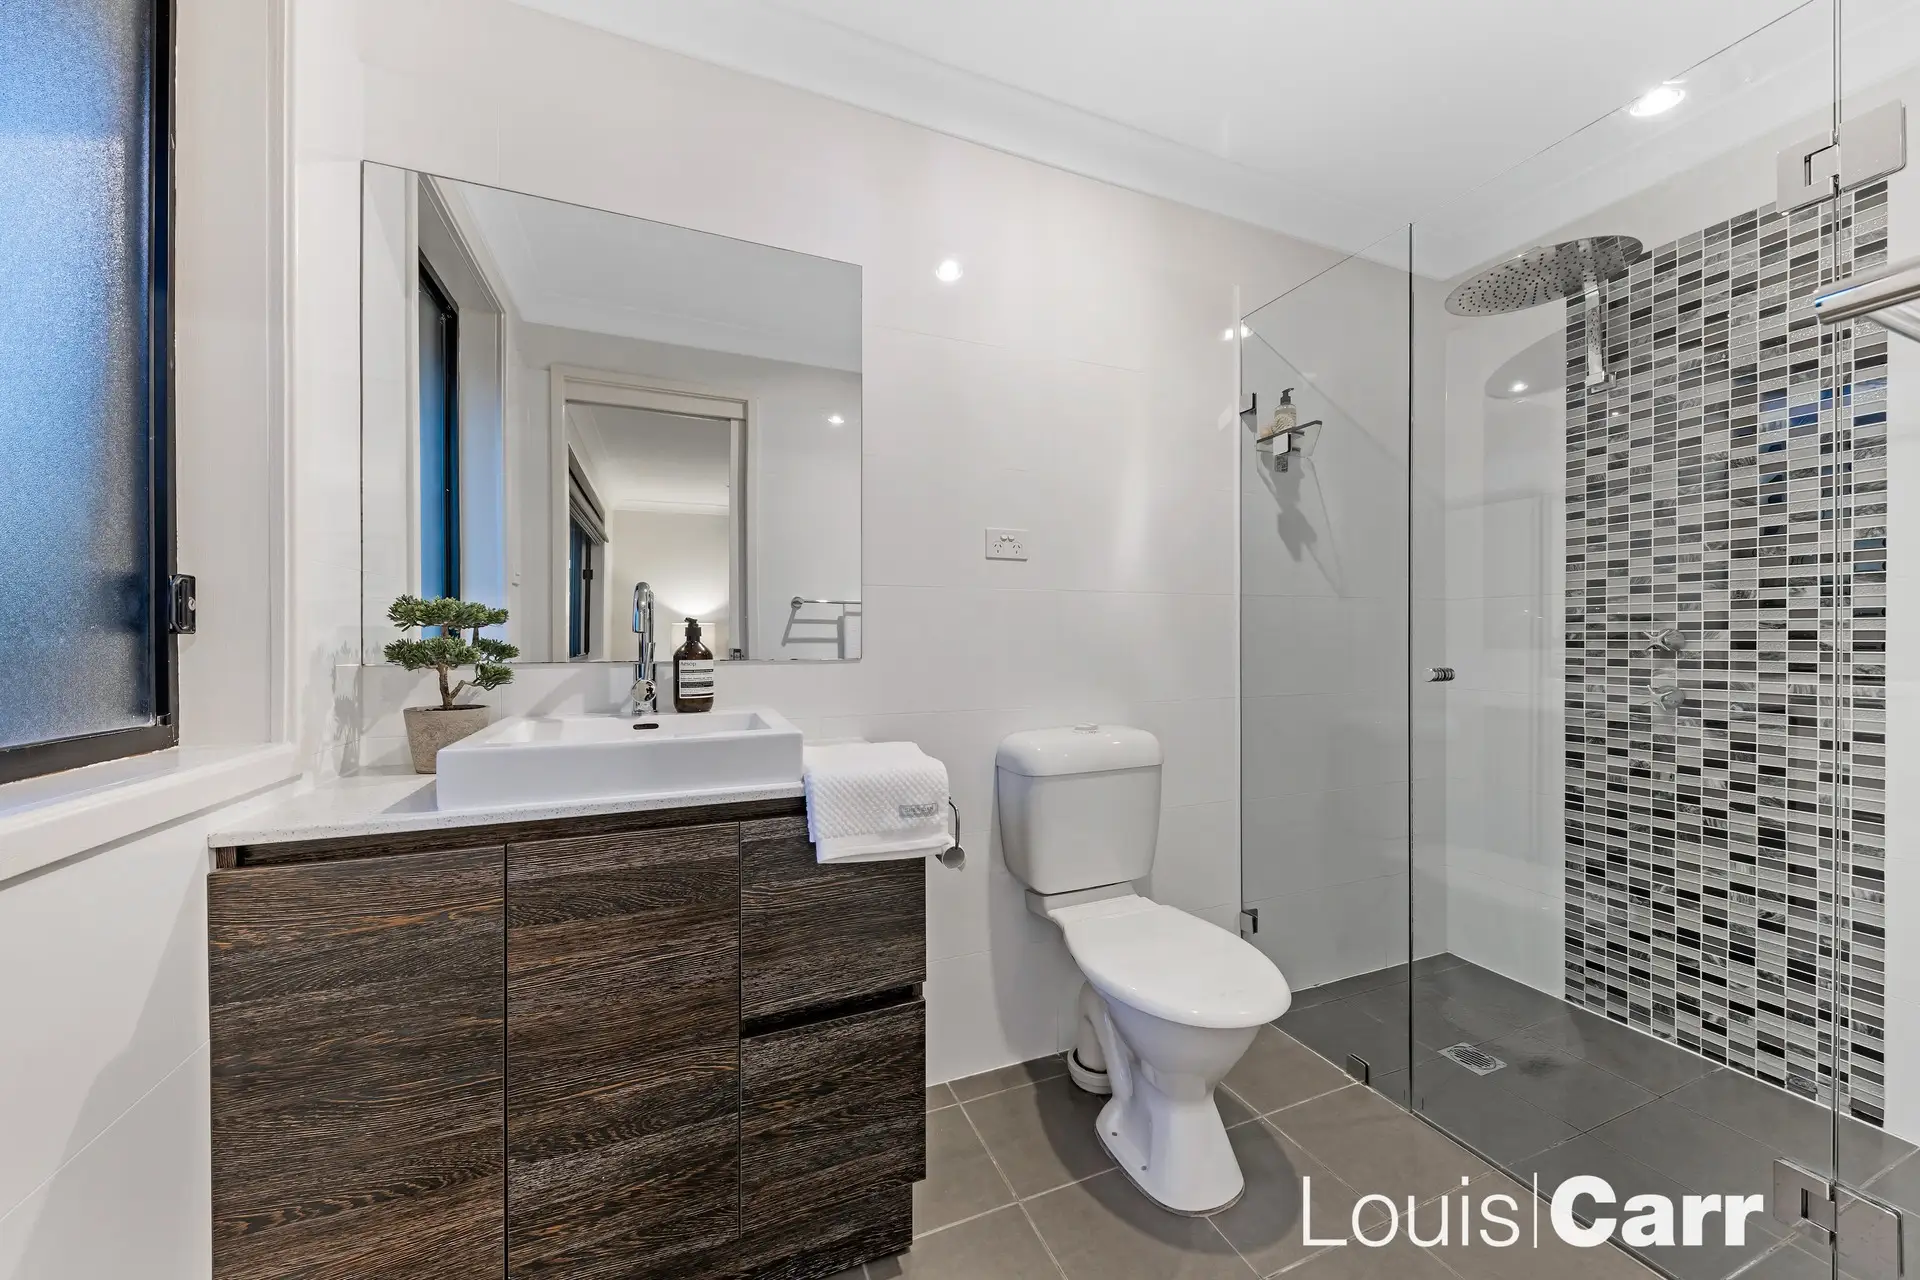 Photo #12: 62 Adelphi Street, Rouse Hill - Sold by Louis Carr Real Estate